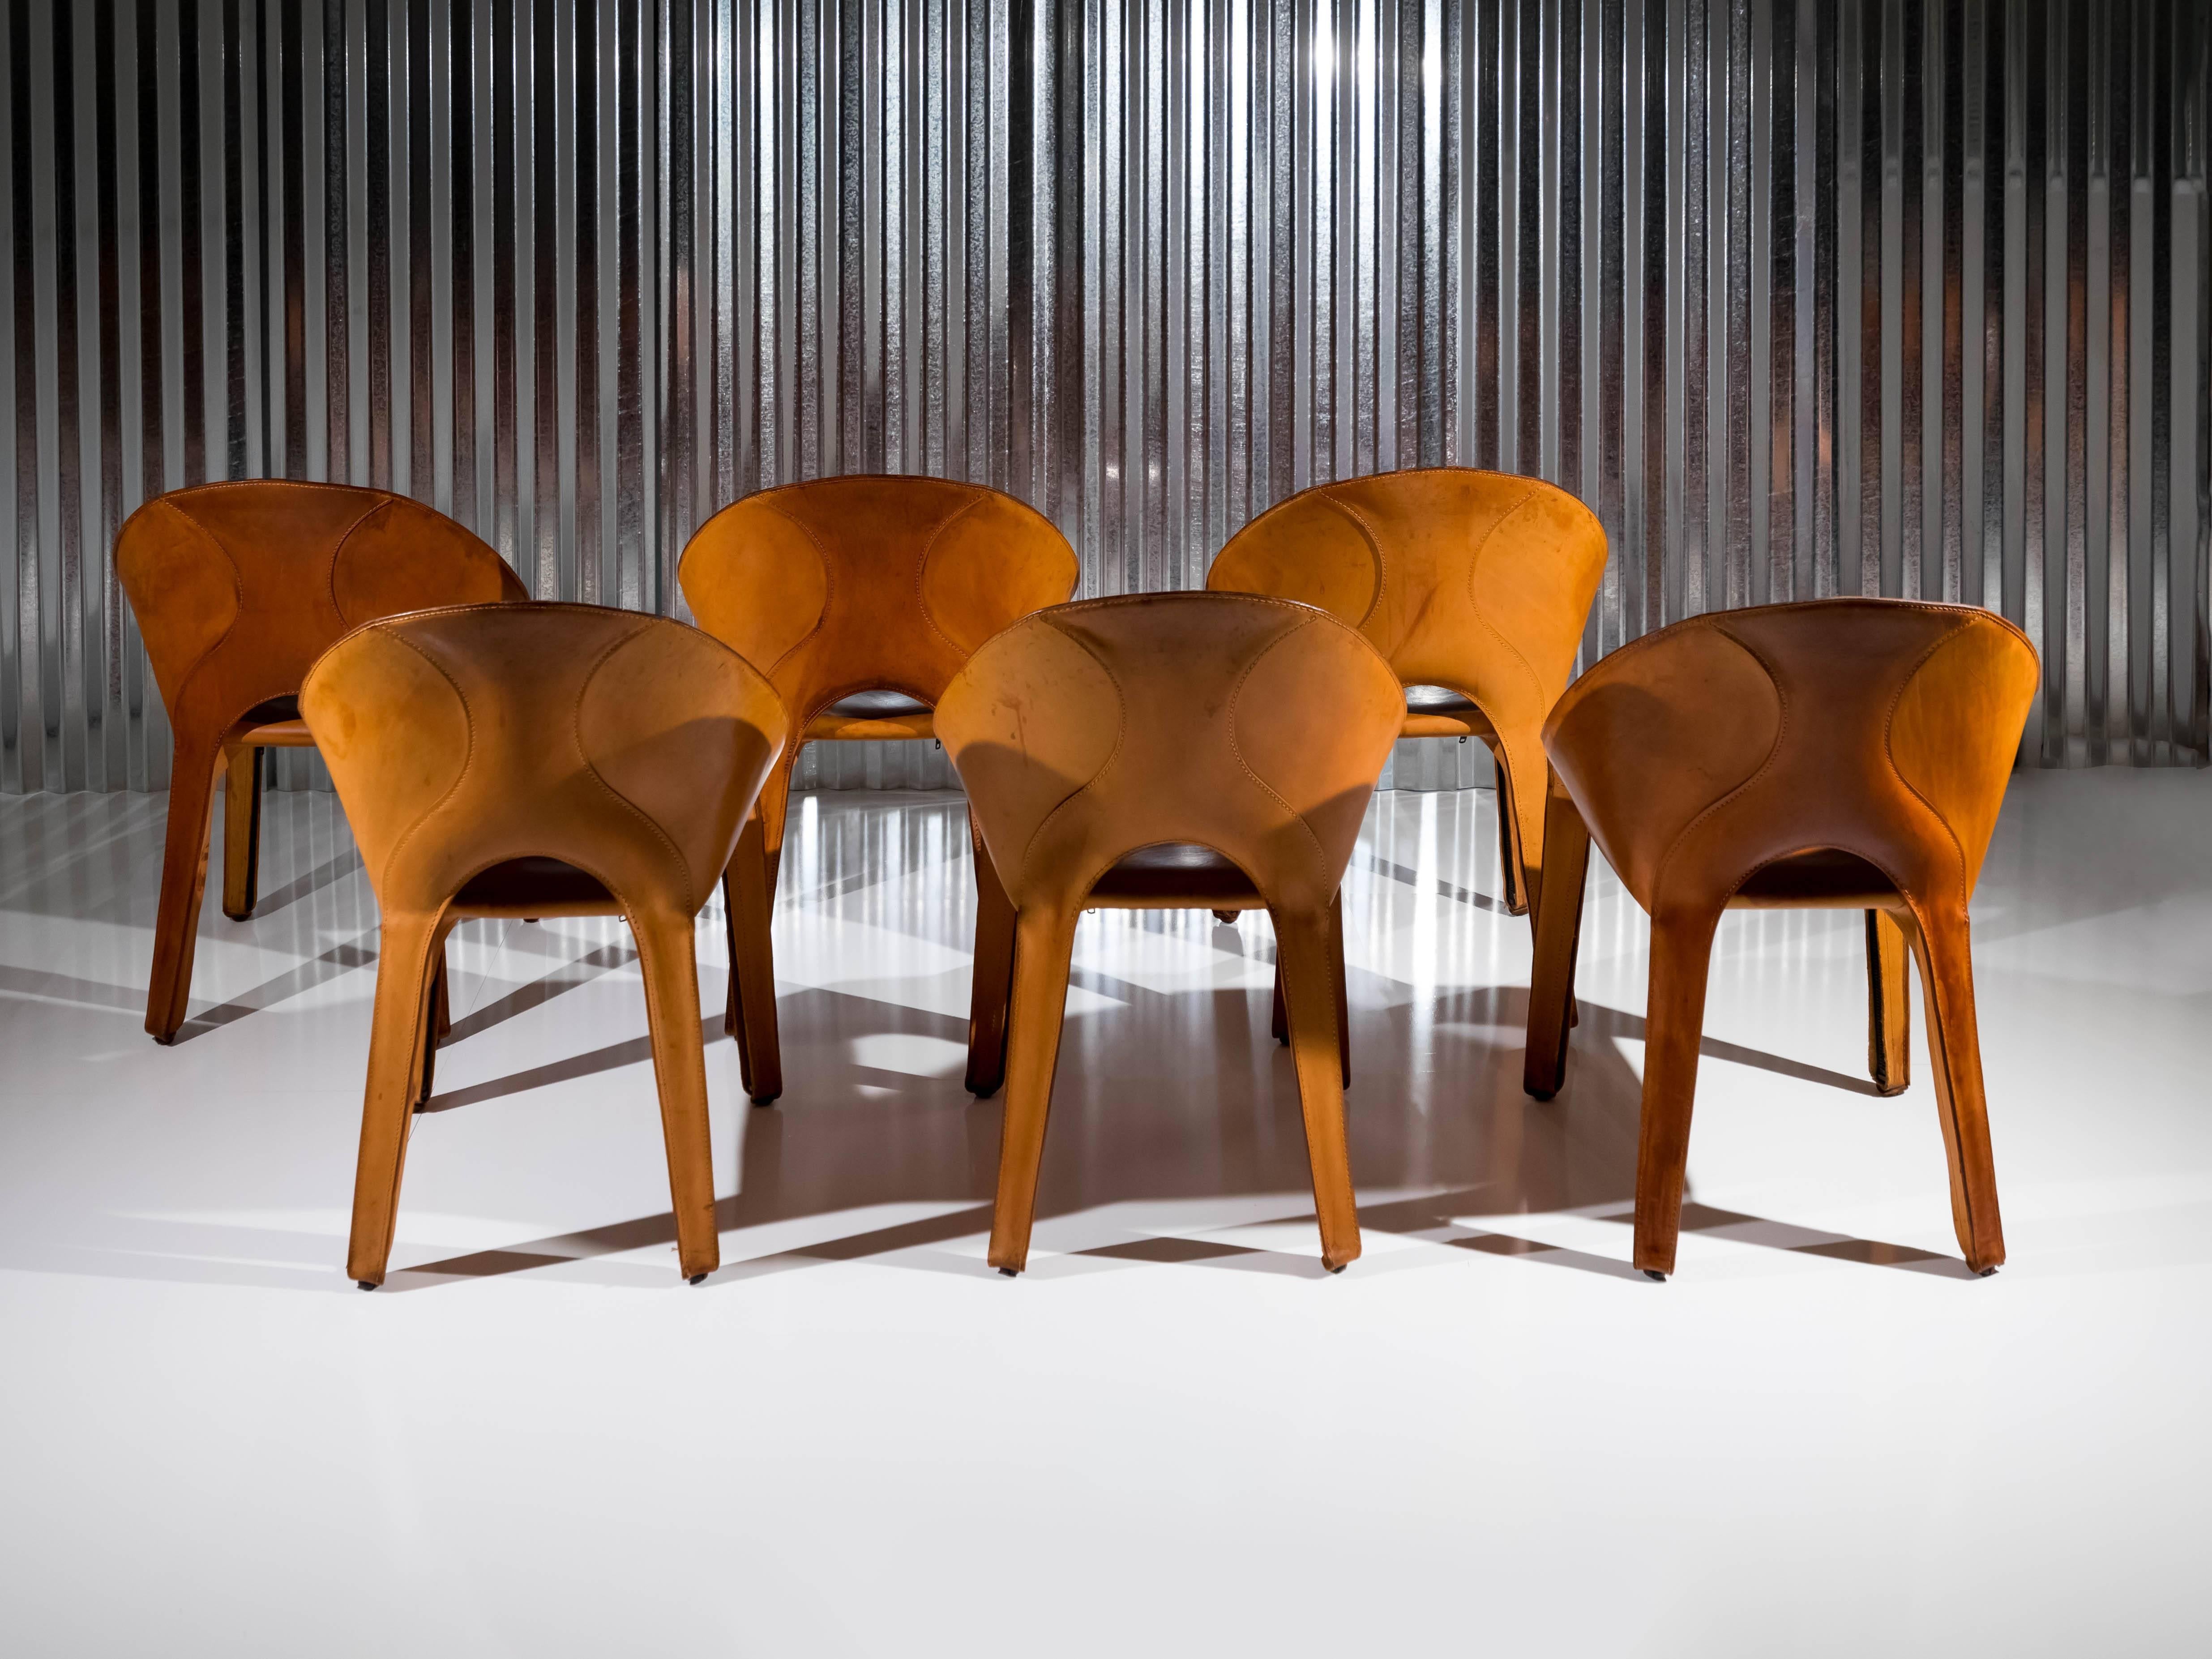 A fantastic and rare set of six 'Lira' chairs designed by Mario Bellini for Cassina in 1989. An evolution of his Cab chair design from 1977, the "Lira" chairs are made from saddle stitched leather that is placed over a metal structure,